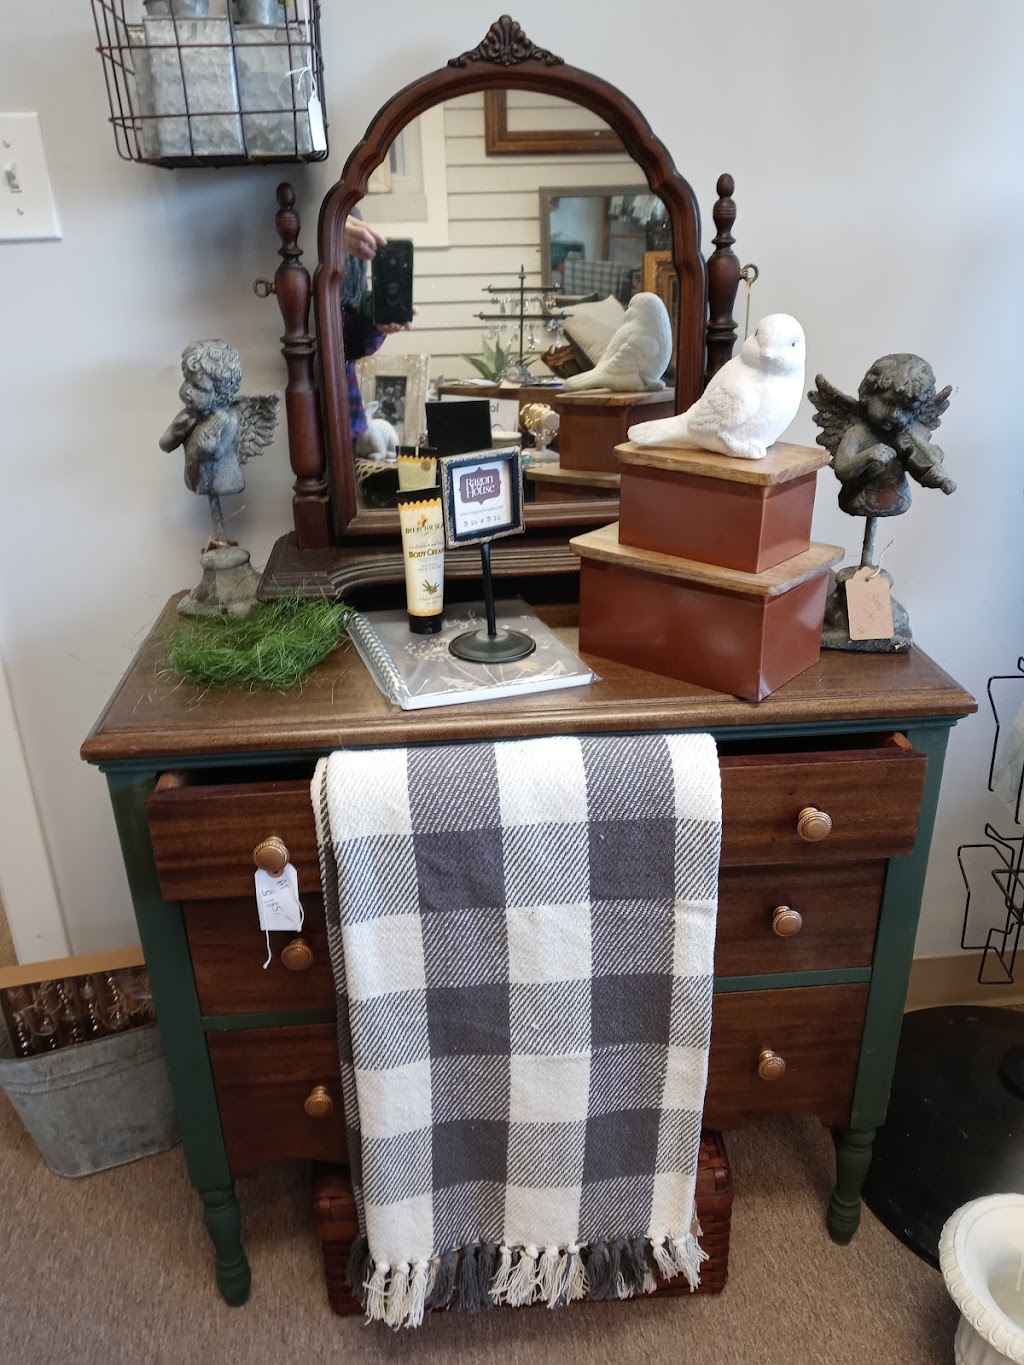 Adorn Vintage and Restoration | 7 Poverty Rd Suite 81H, Southbury, CT 06488 | Phone: (203) 586-8874